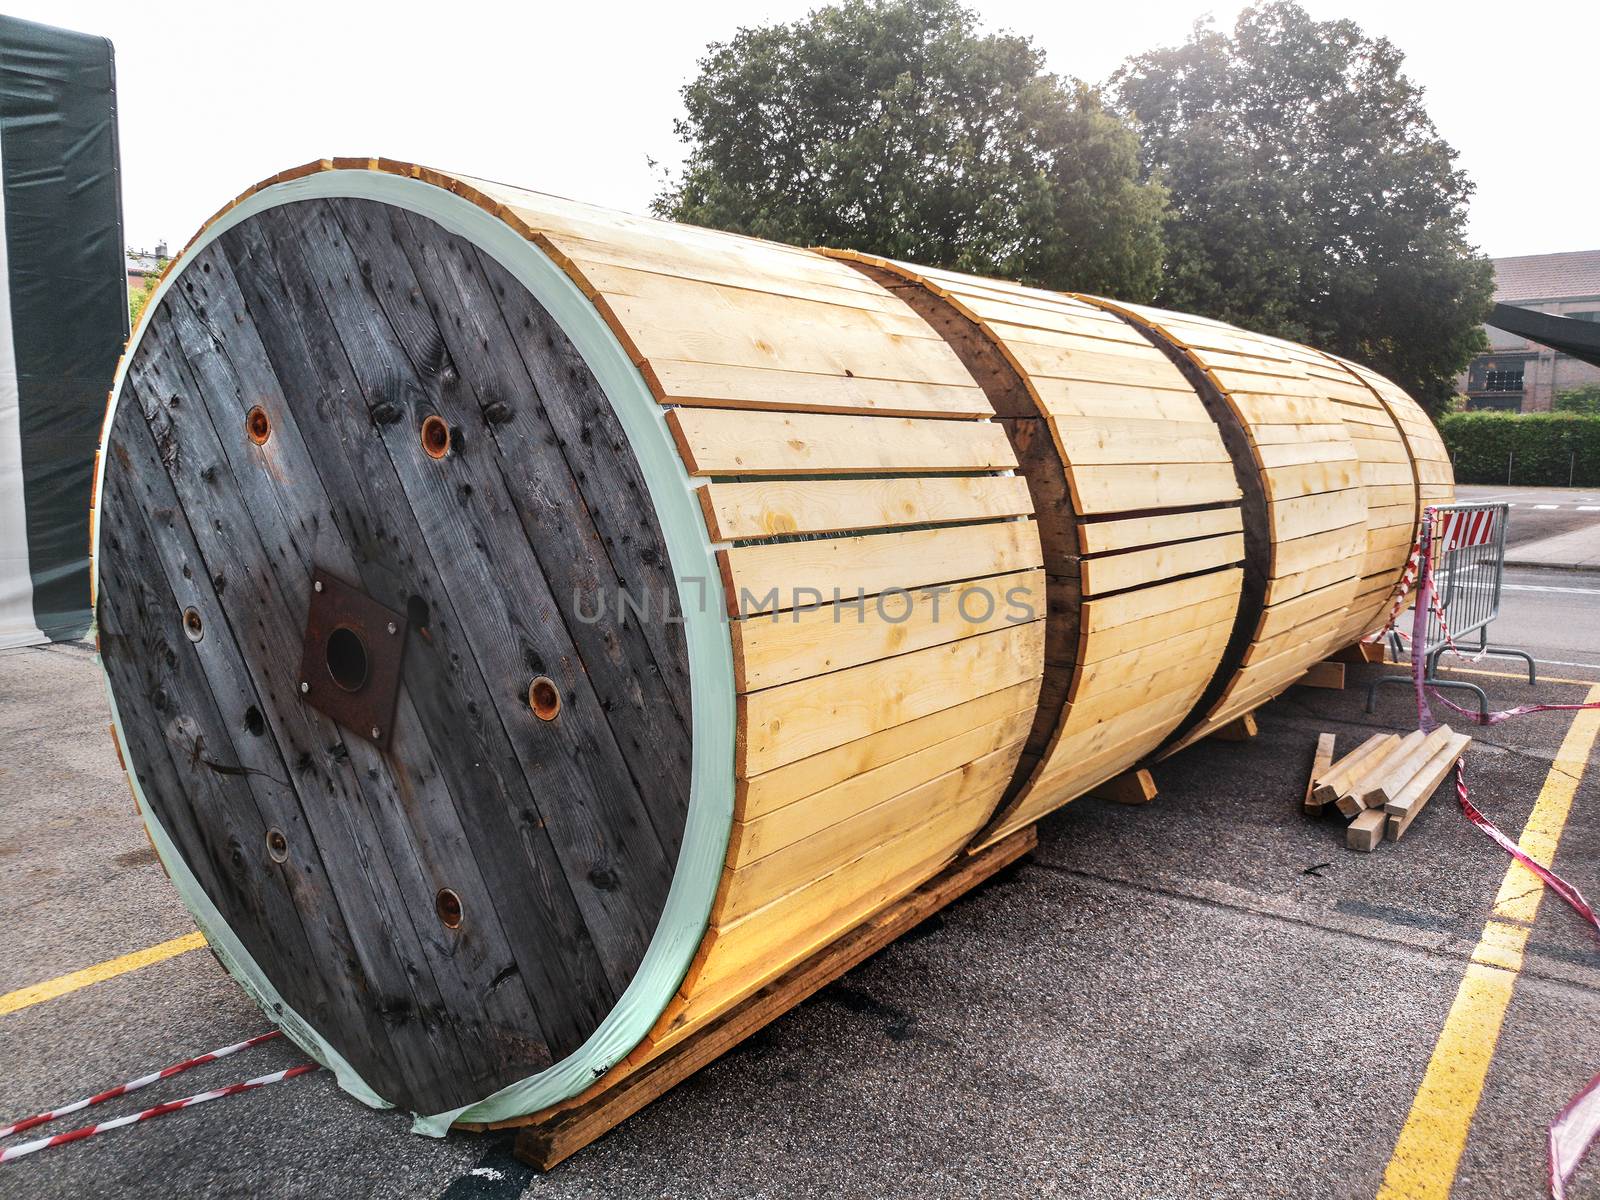 large containers for storing large electrical cables to be installed.